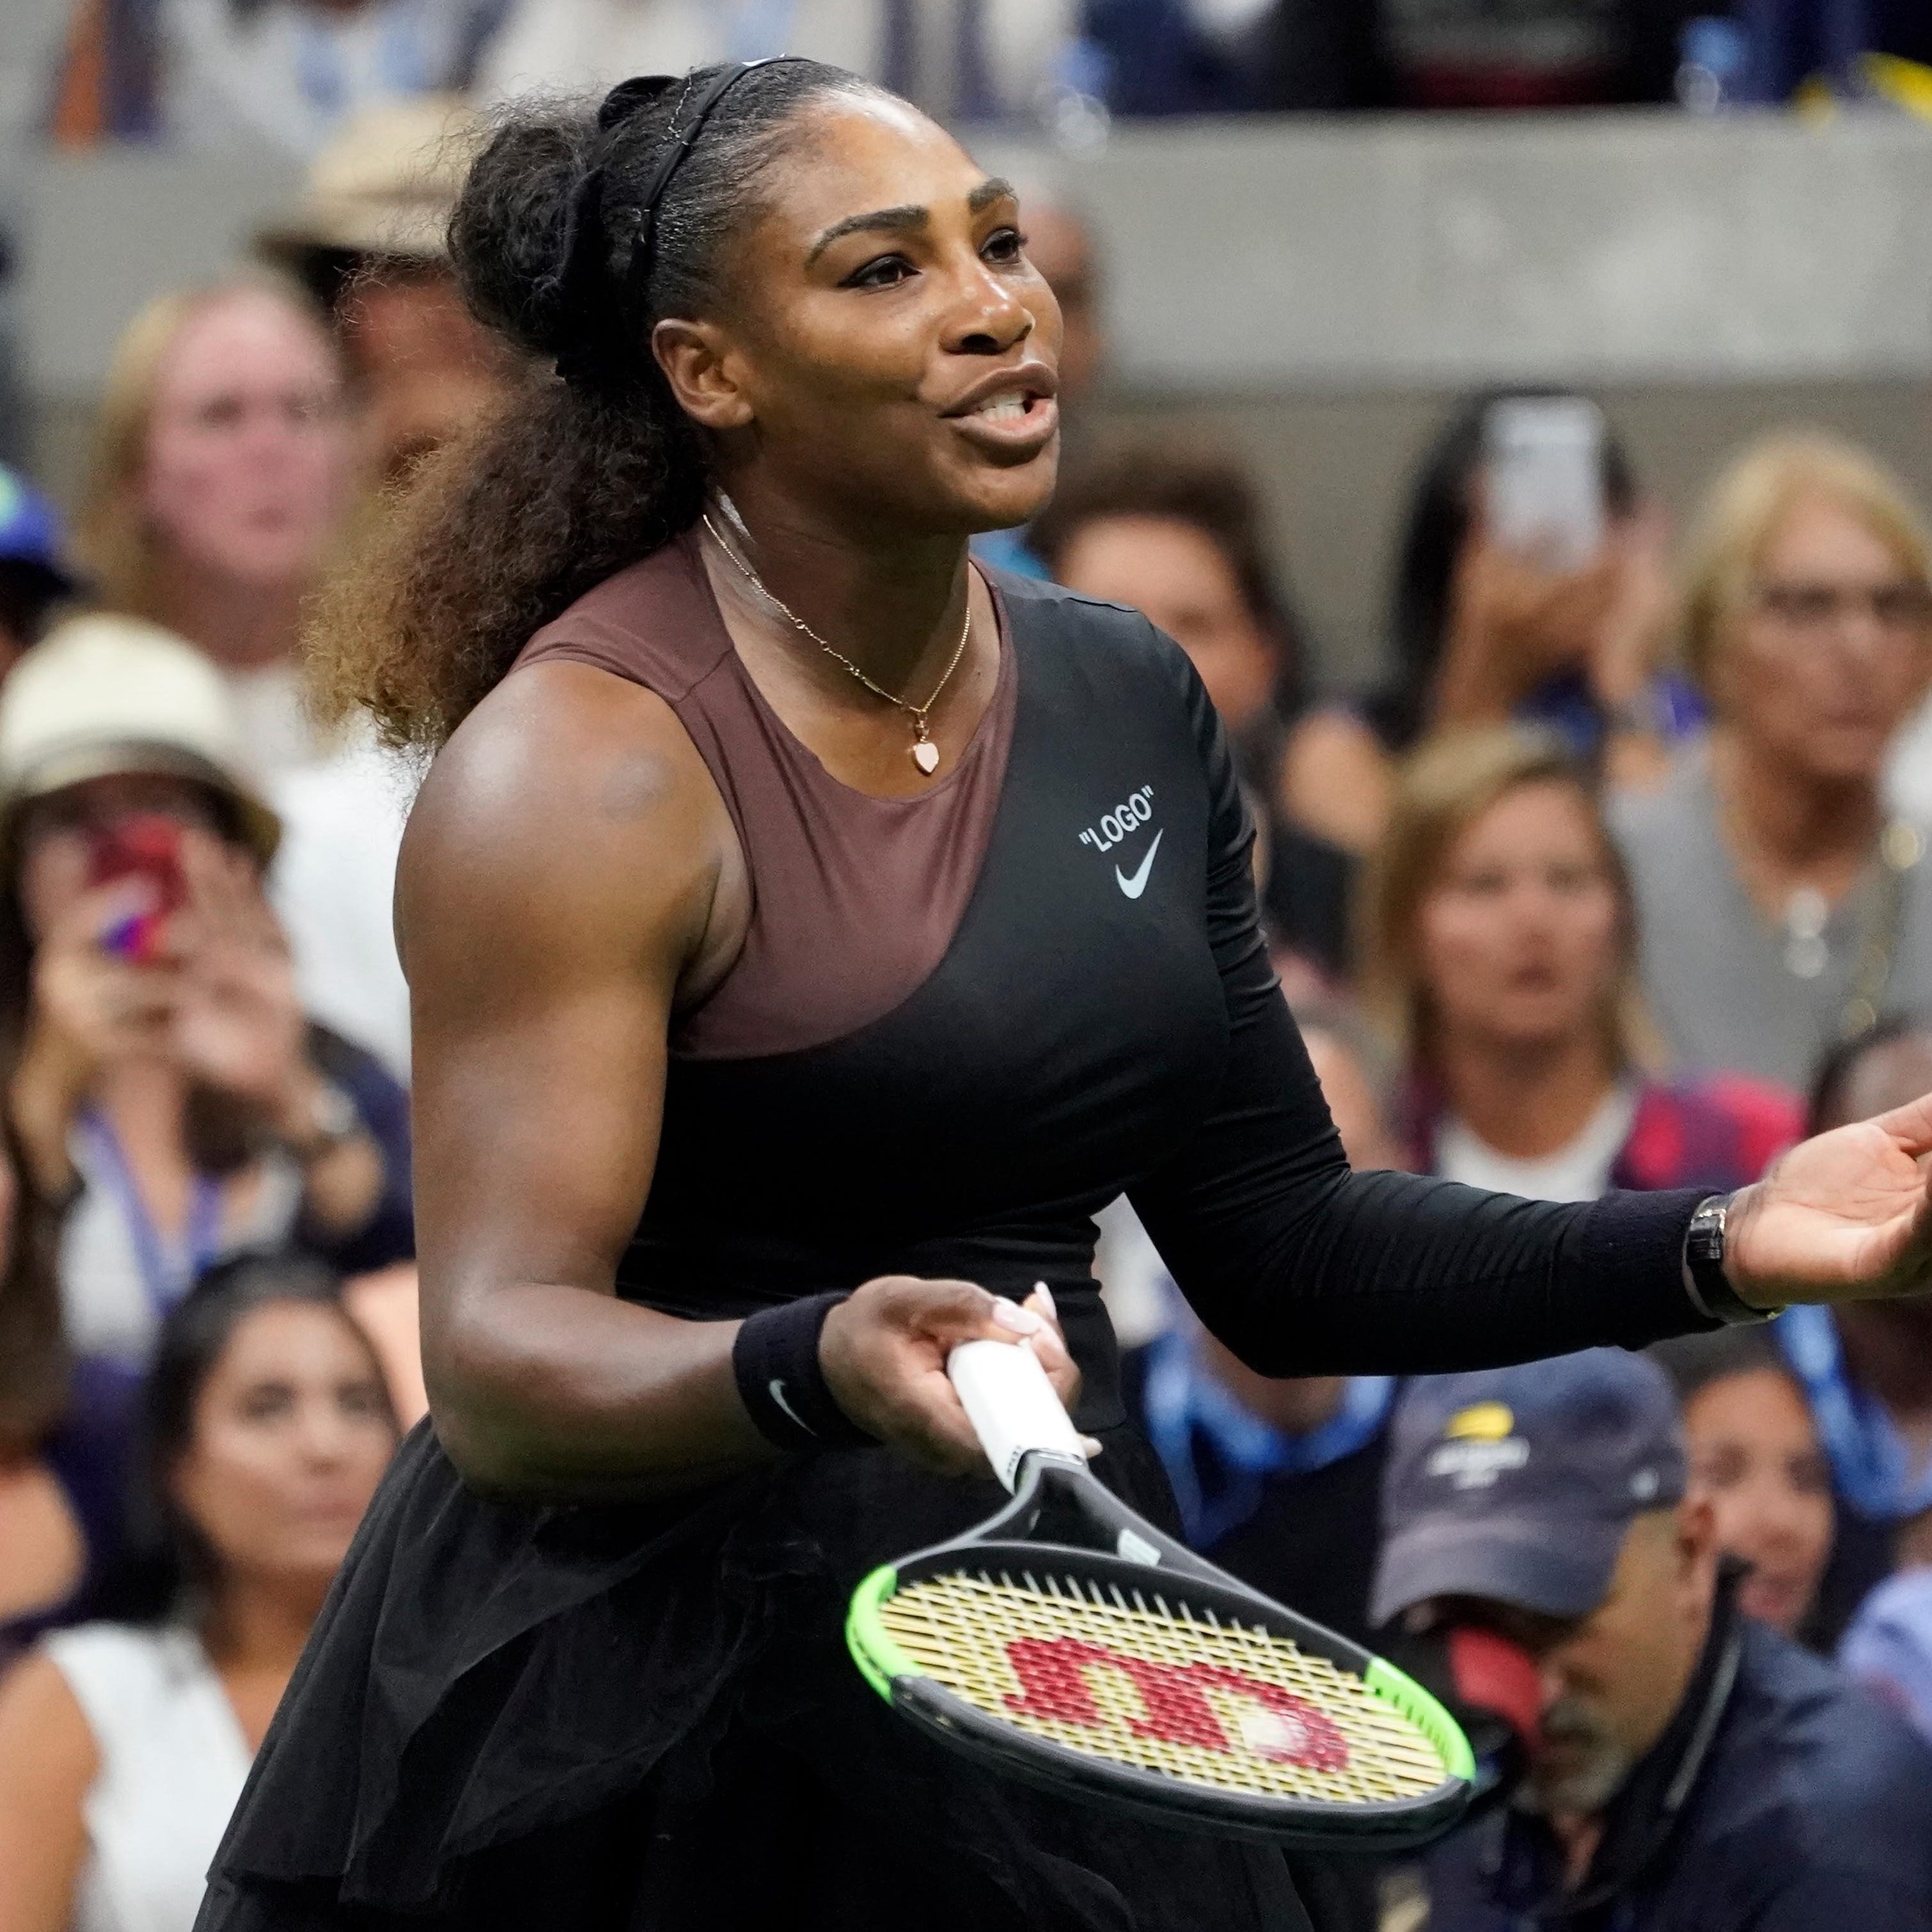 Serena Williams lost the US Open women's final Saturday after a controversial dispute with the chair umpire.